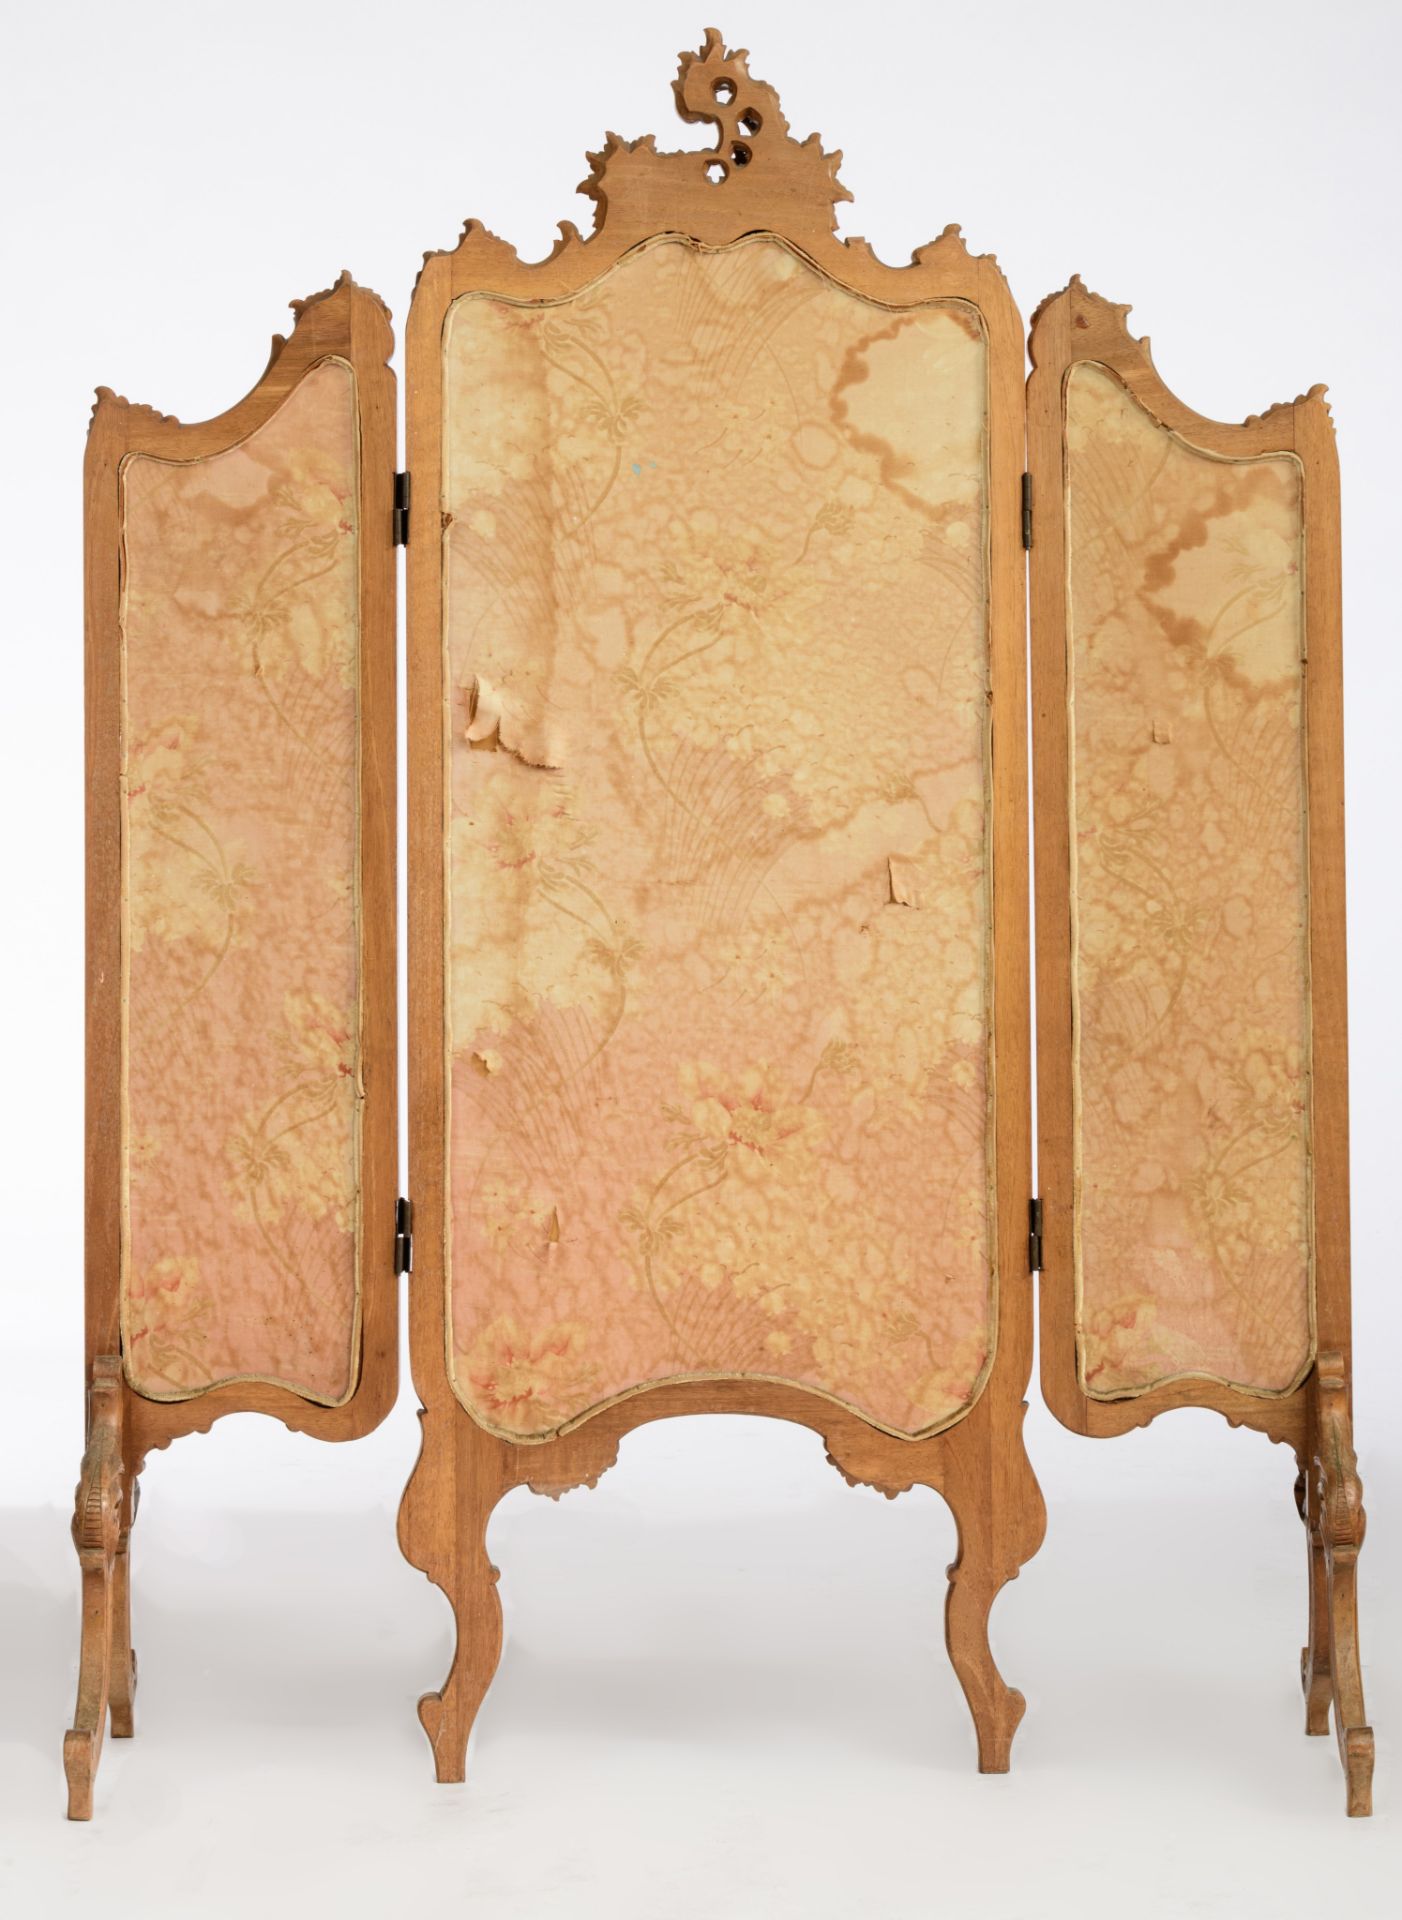 A Rococo style fire screen, with a romantic scene in the 'Vernis Martin' manner, H 148 - W 52 - 106 - Image 2 of 7